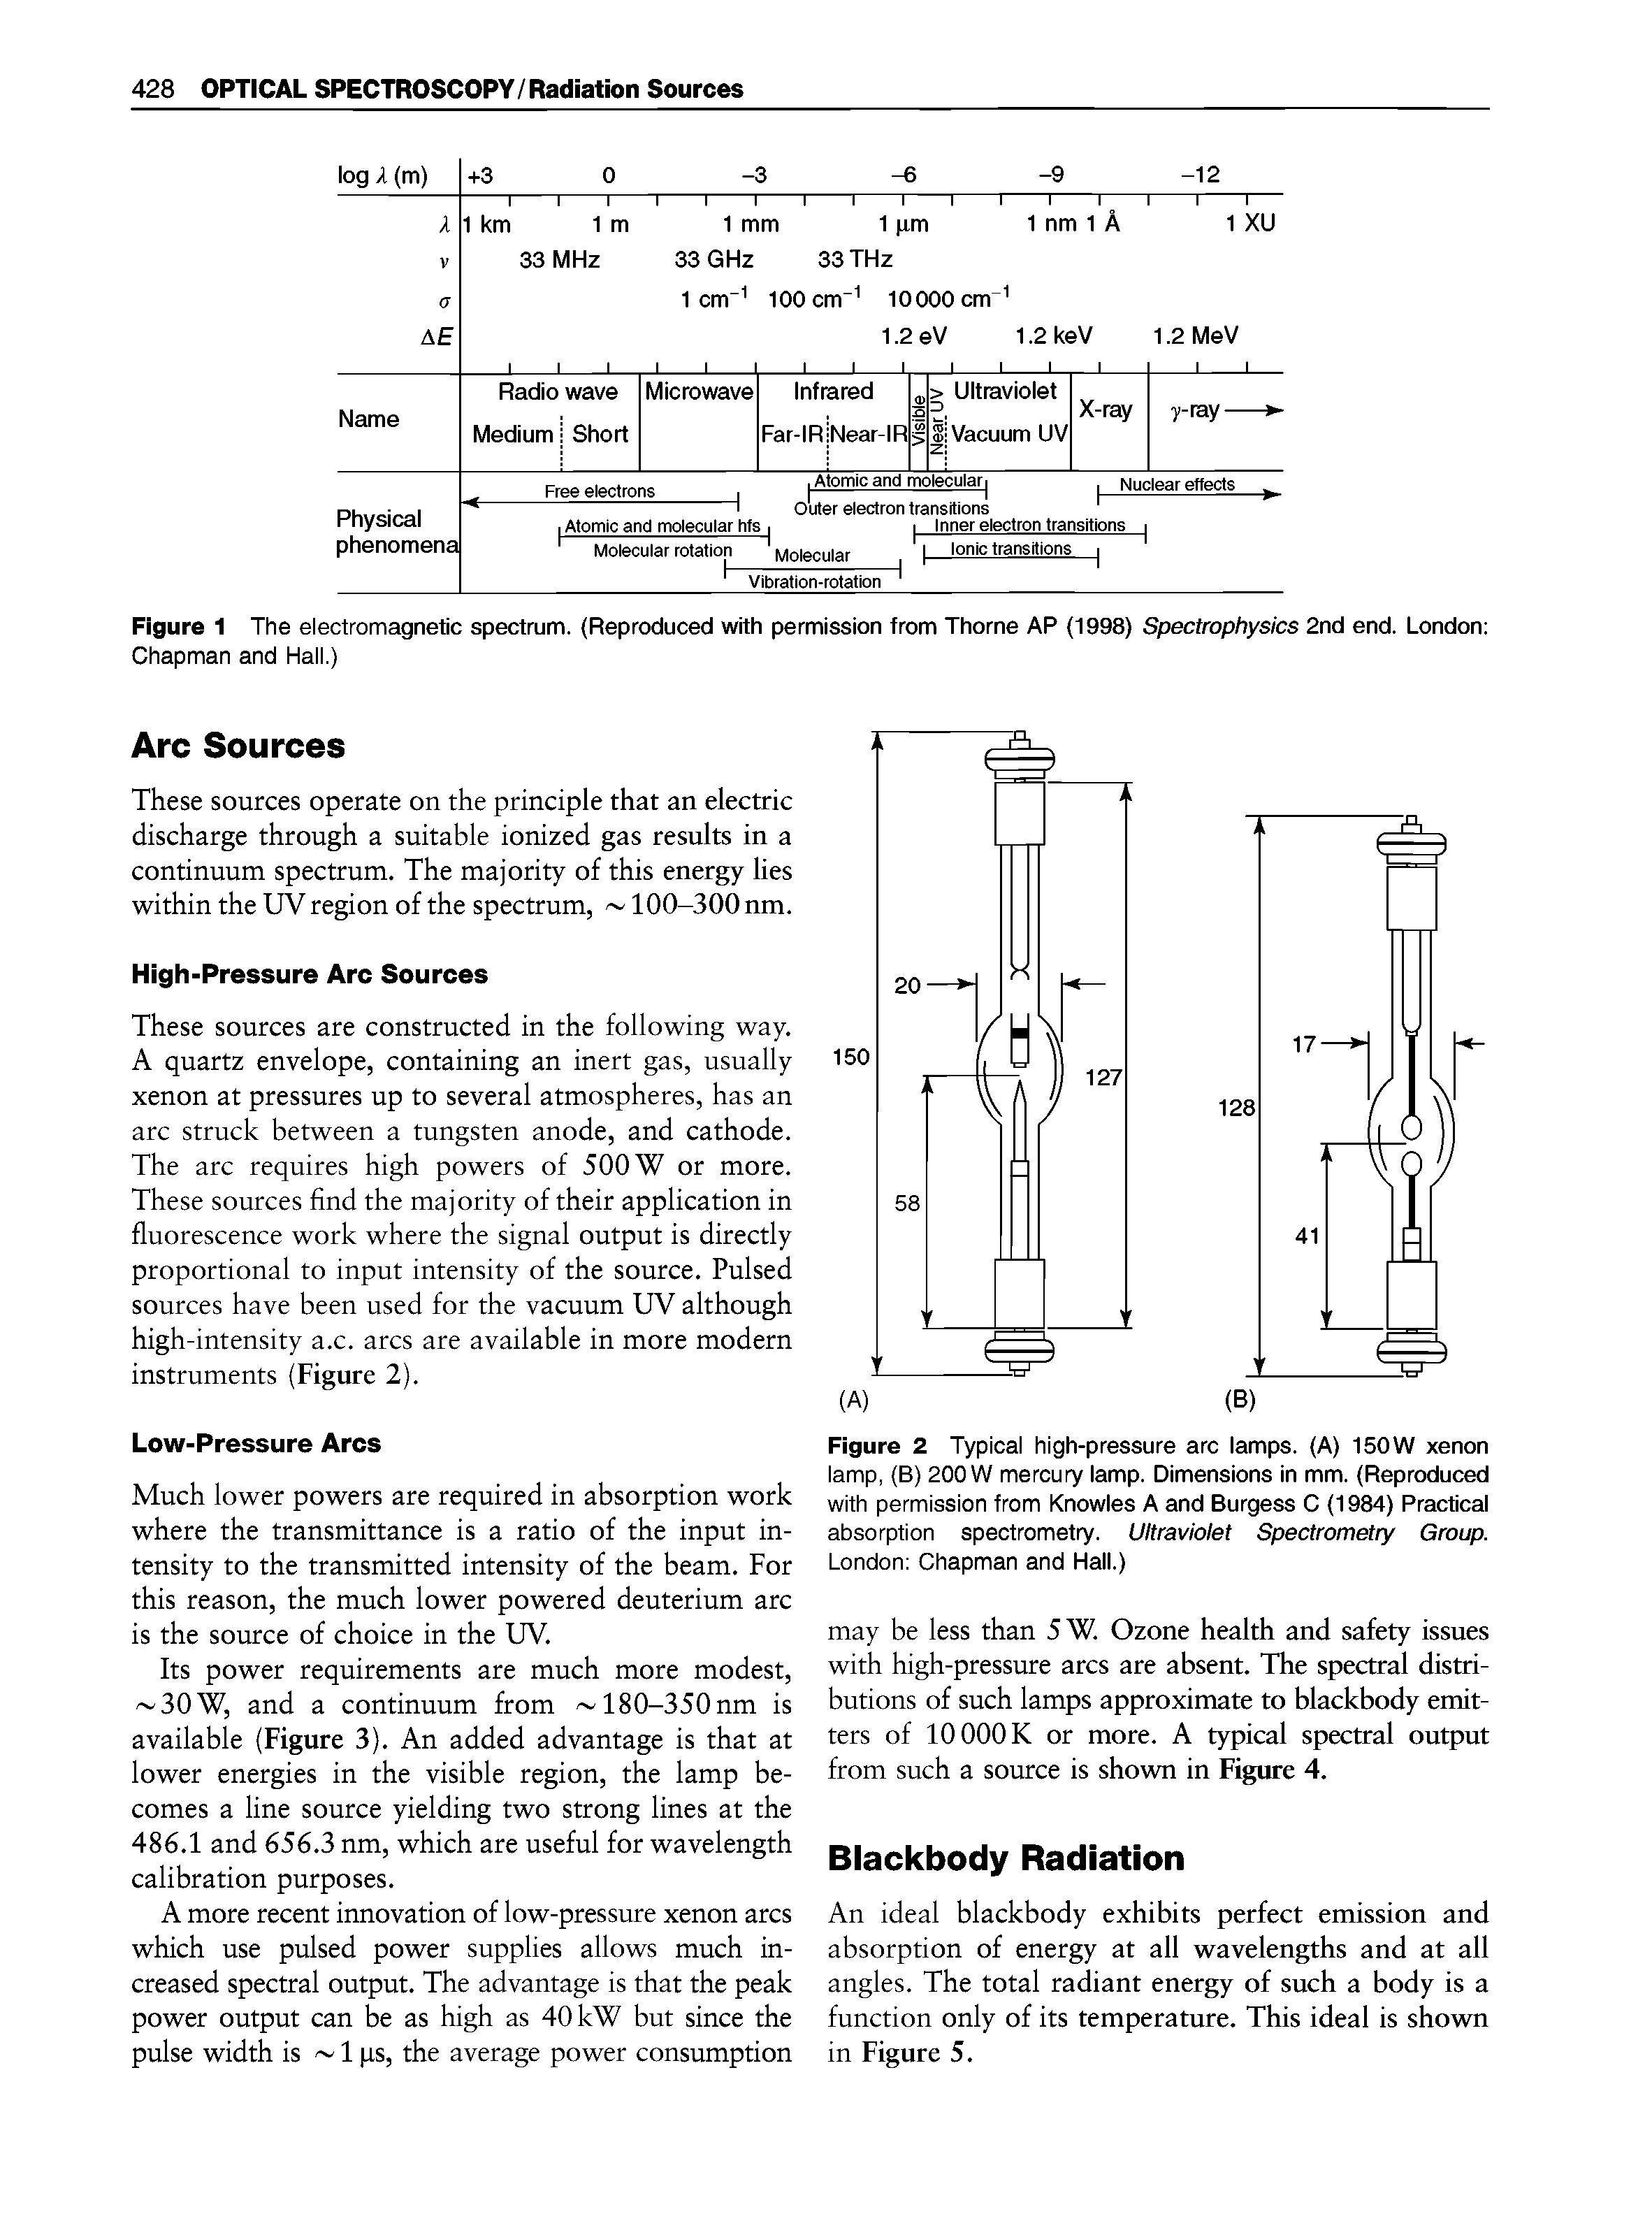 Figure 2 Typical high-pressure arc lamps. (A) 150W xenon lamp, (B) 200 W mercury lamp. Dimensions in mm. (Reproduced with permission from Knowles A and Burgess C (1984) Practical absorption spectrometry. Ultraviolet Spectrometry Group. London Chapman and Hall.)...